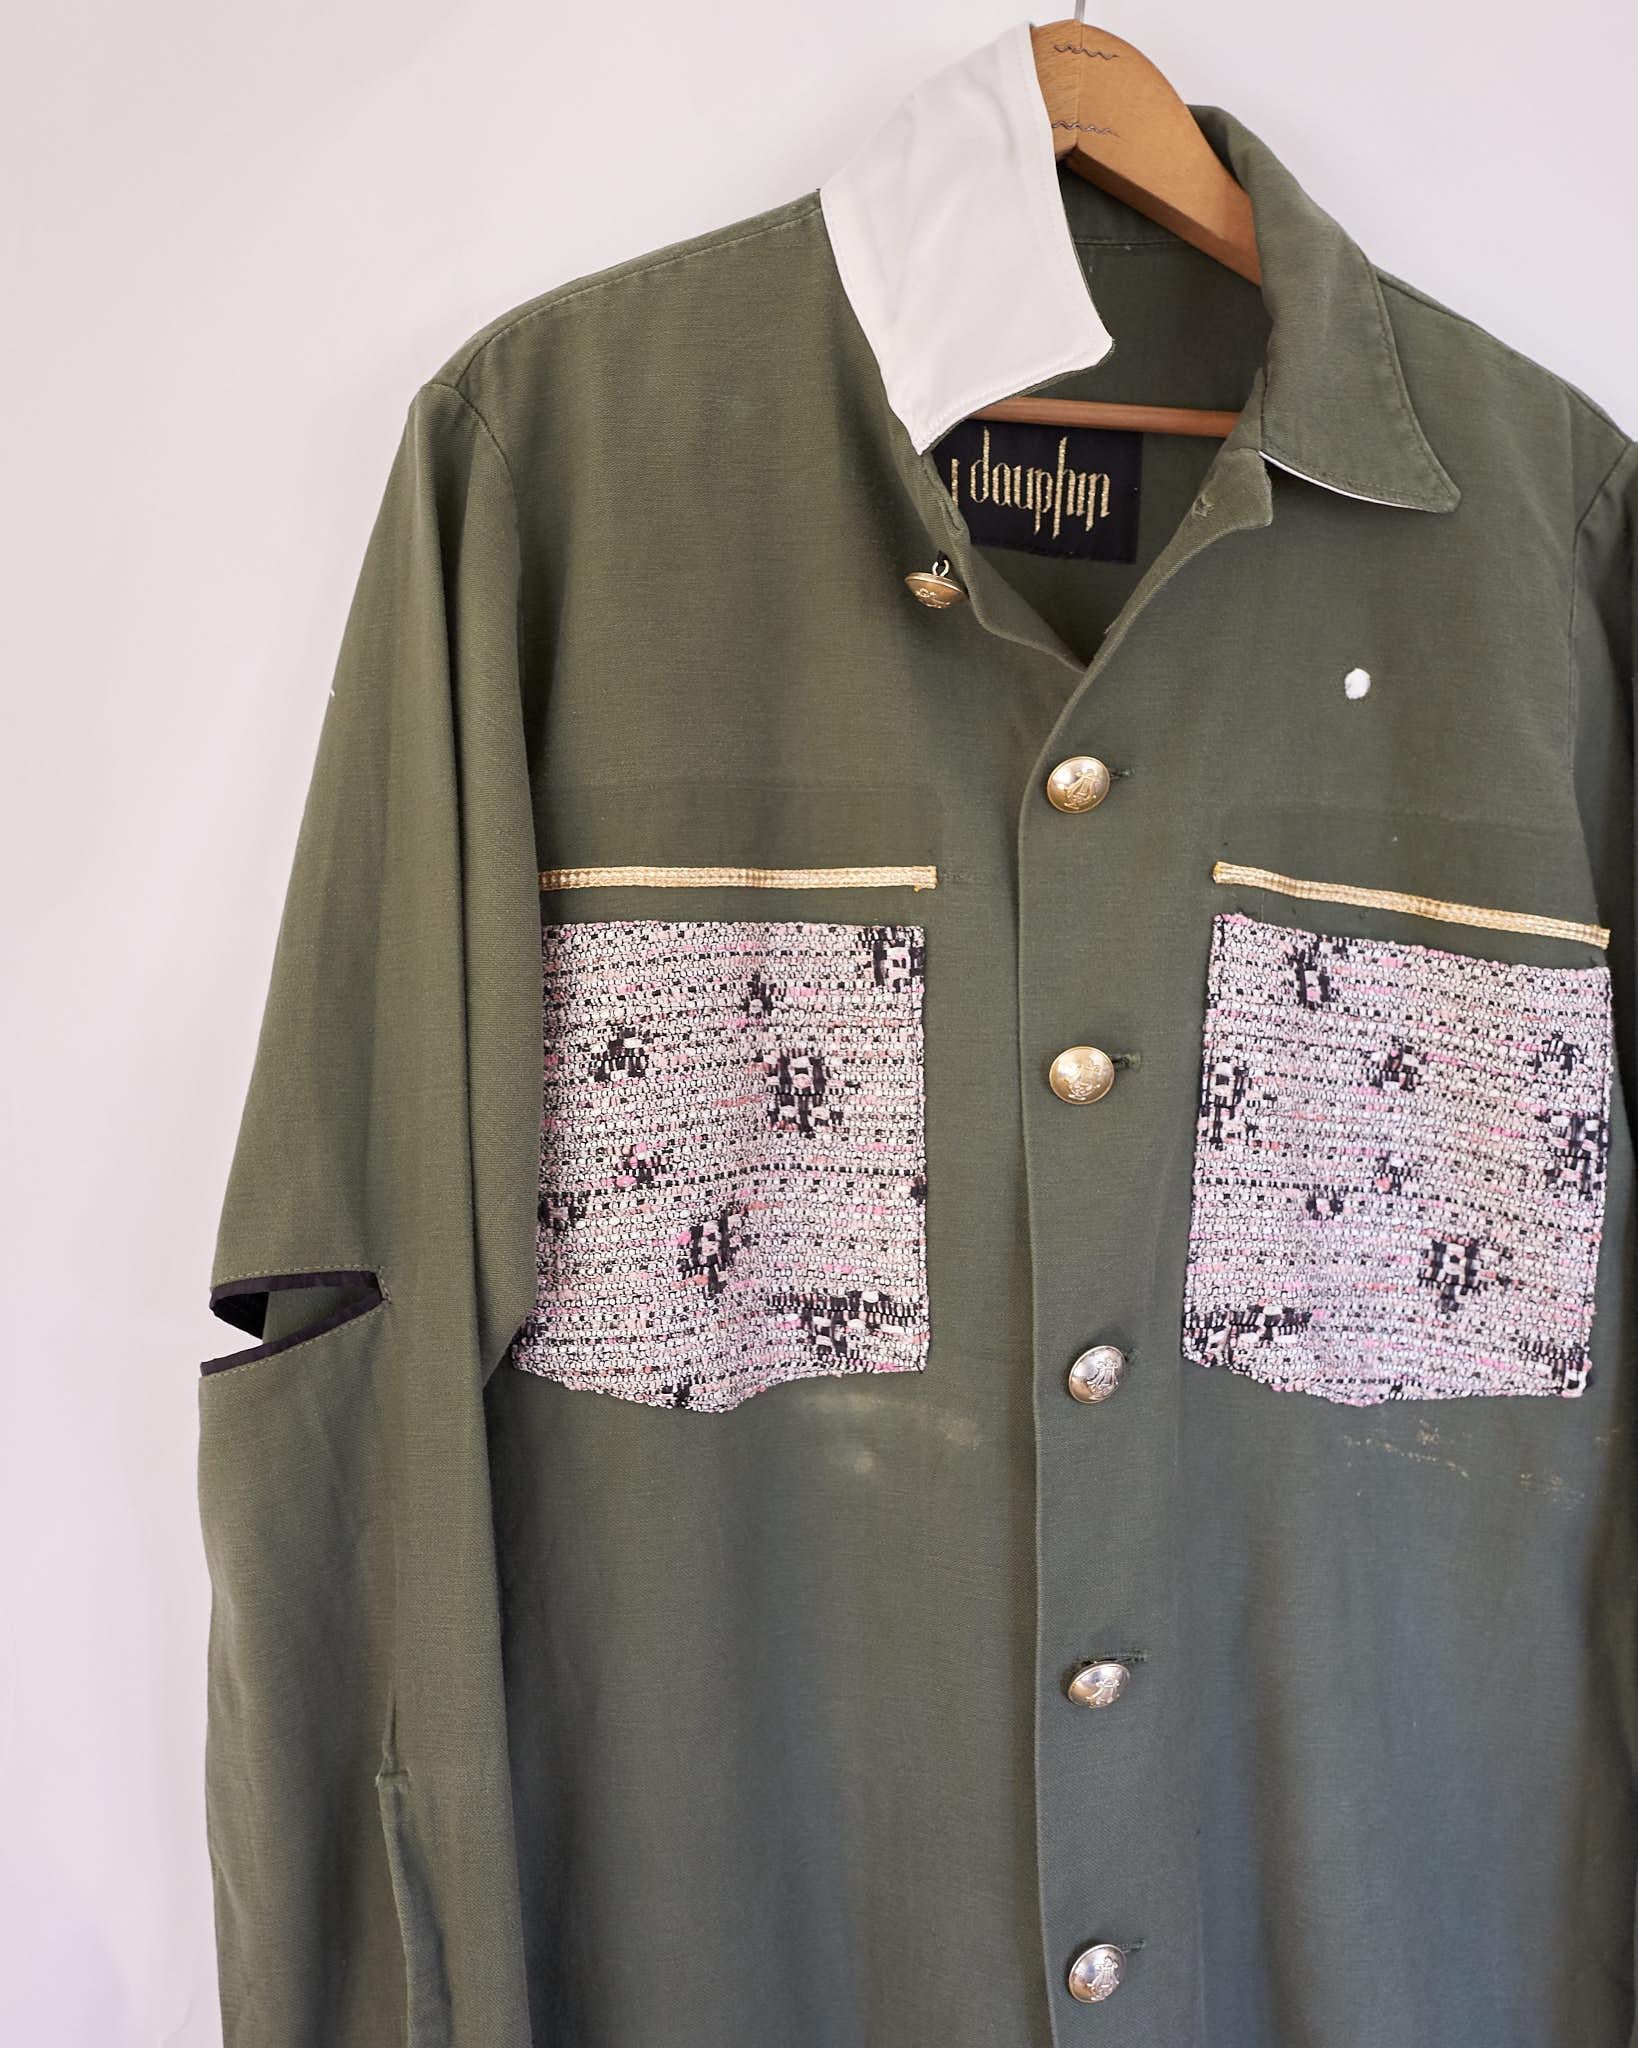 Embellished Jacket Green Original Designer Tweed One of a kind J Dauphin
Brand: J Dauphin
Size: MEDIUM
Sustainable Luxury, Up-cycled and Re-purposed Vintage

Our Up-cycled Vintage Jackets are made from vintage, natural fibers, military clothing and